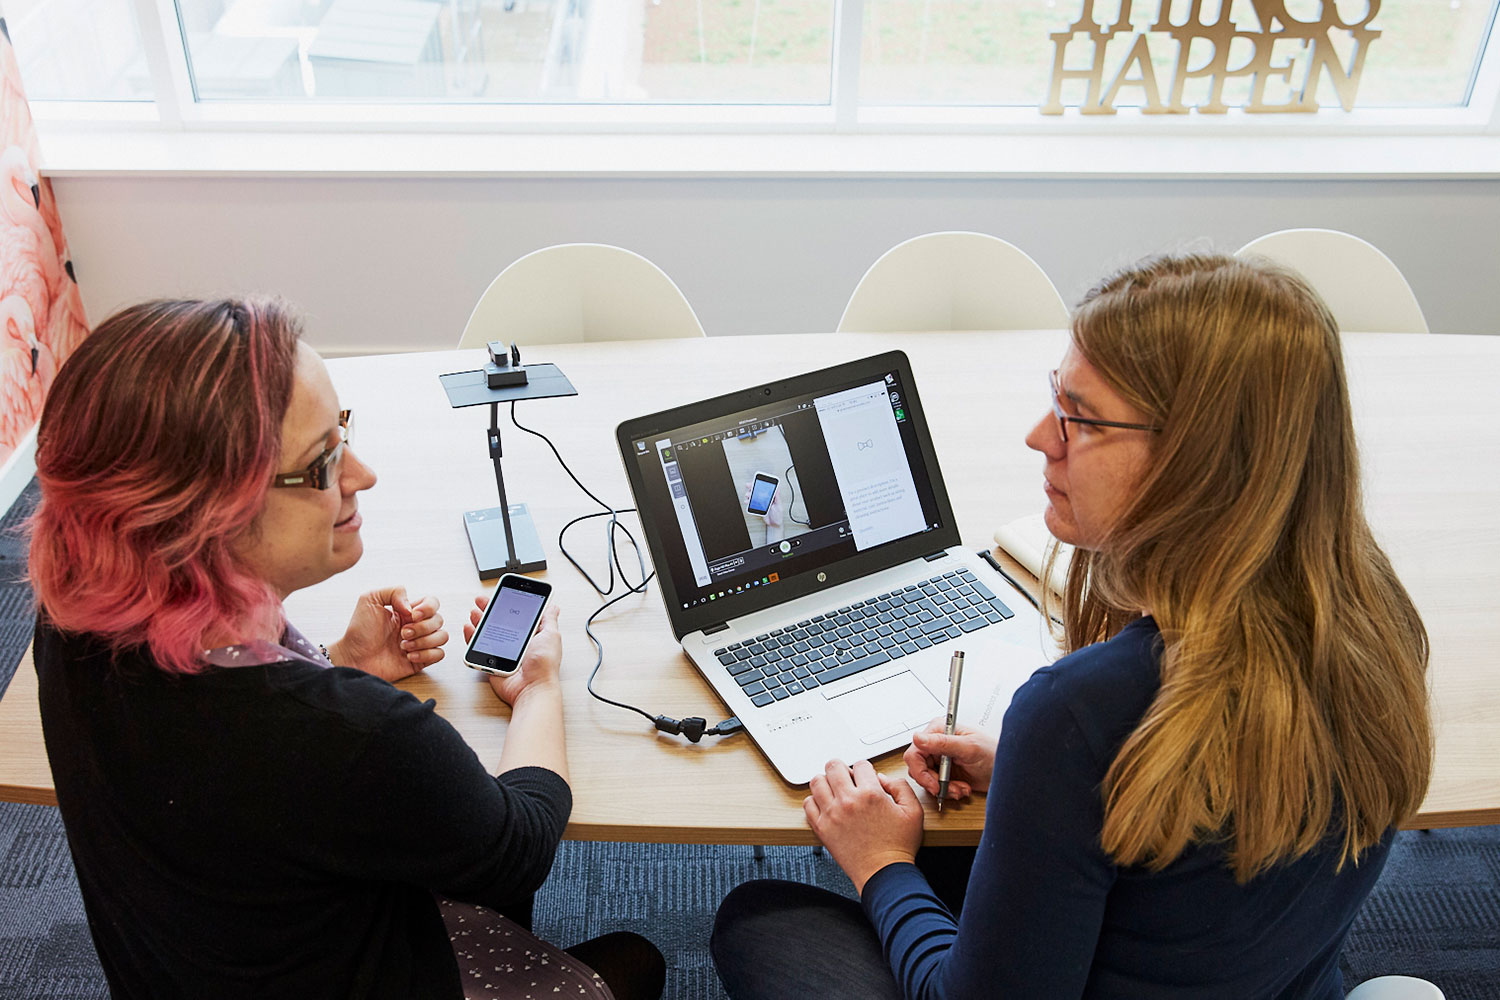 Two women discuss issues during snapshot user testing